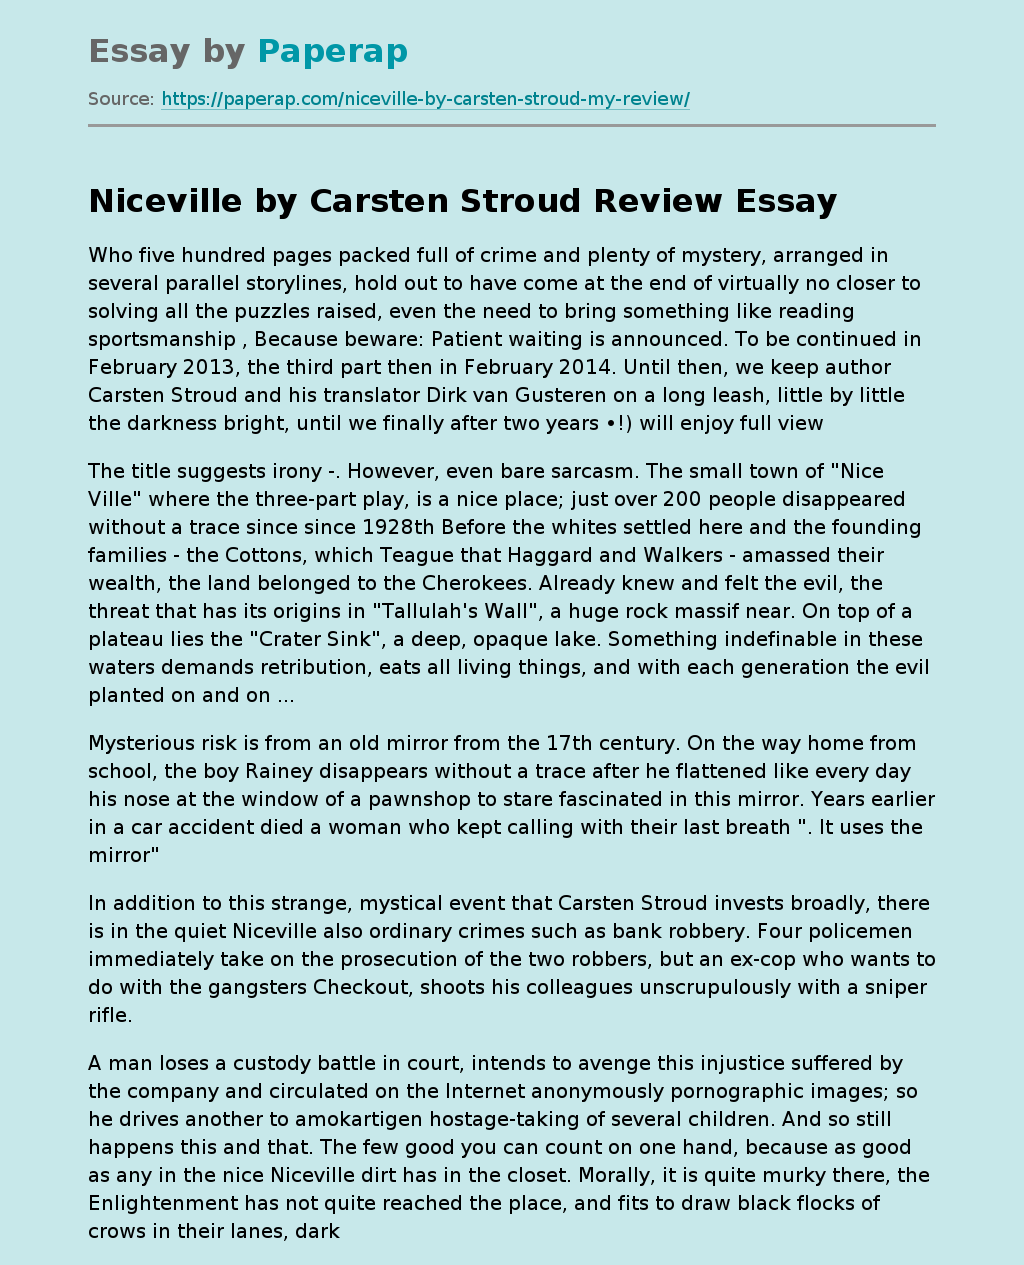 Niceville by Carsten Stroud Review